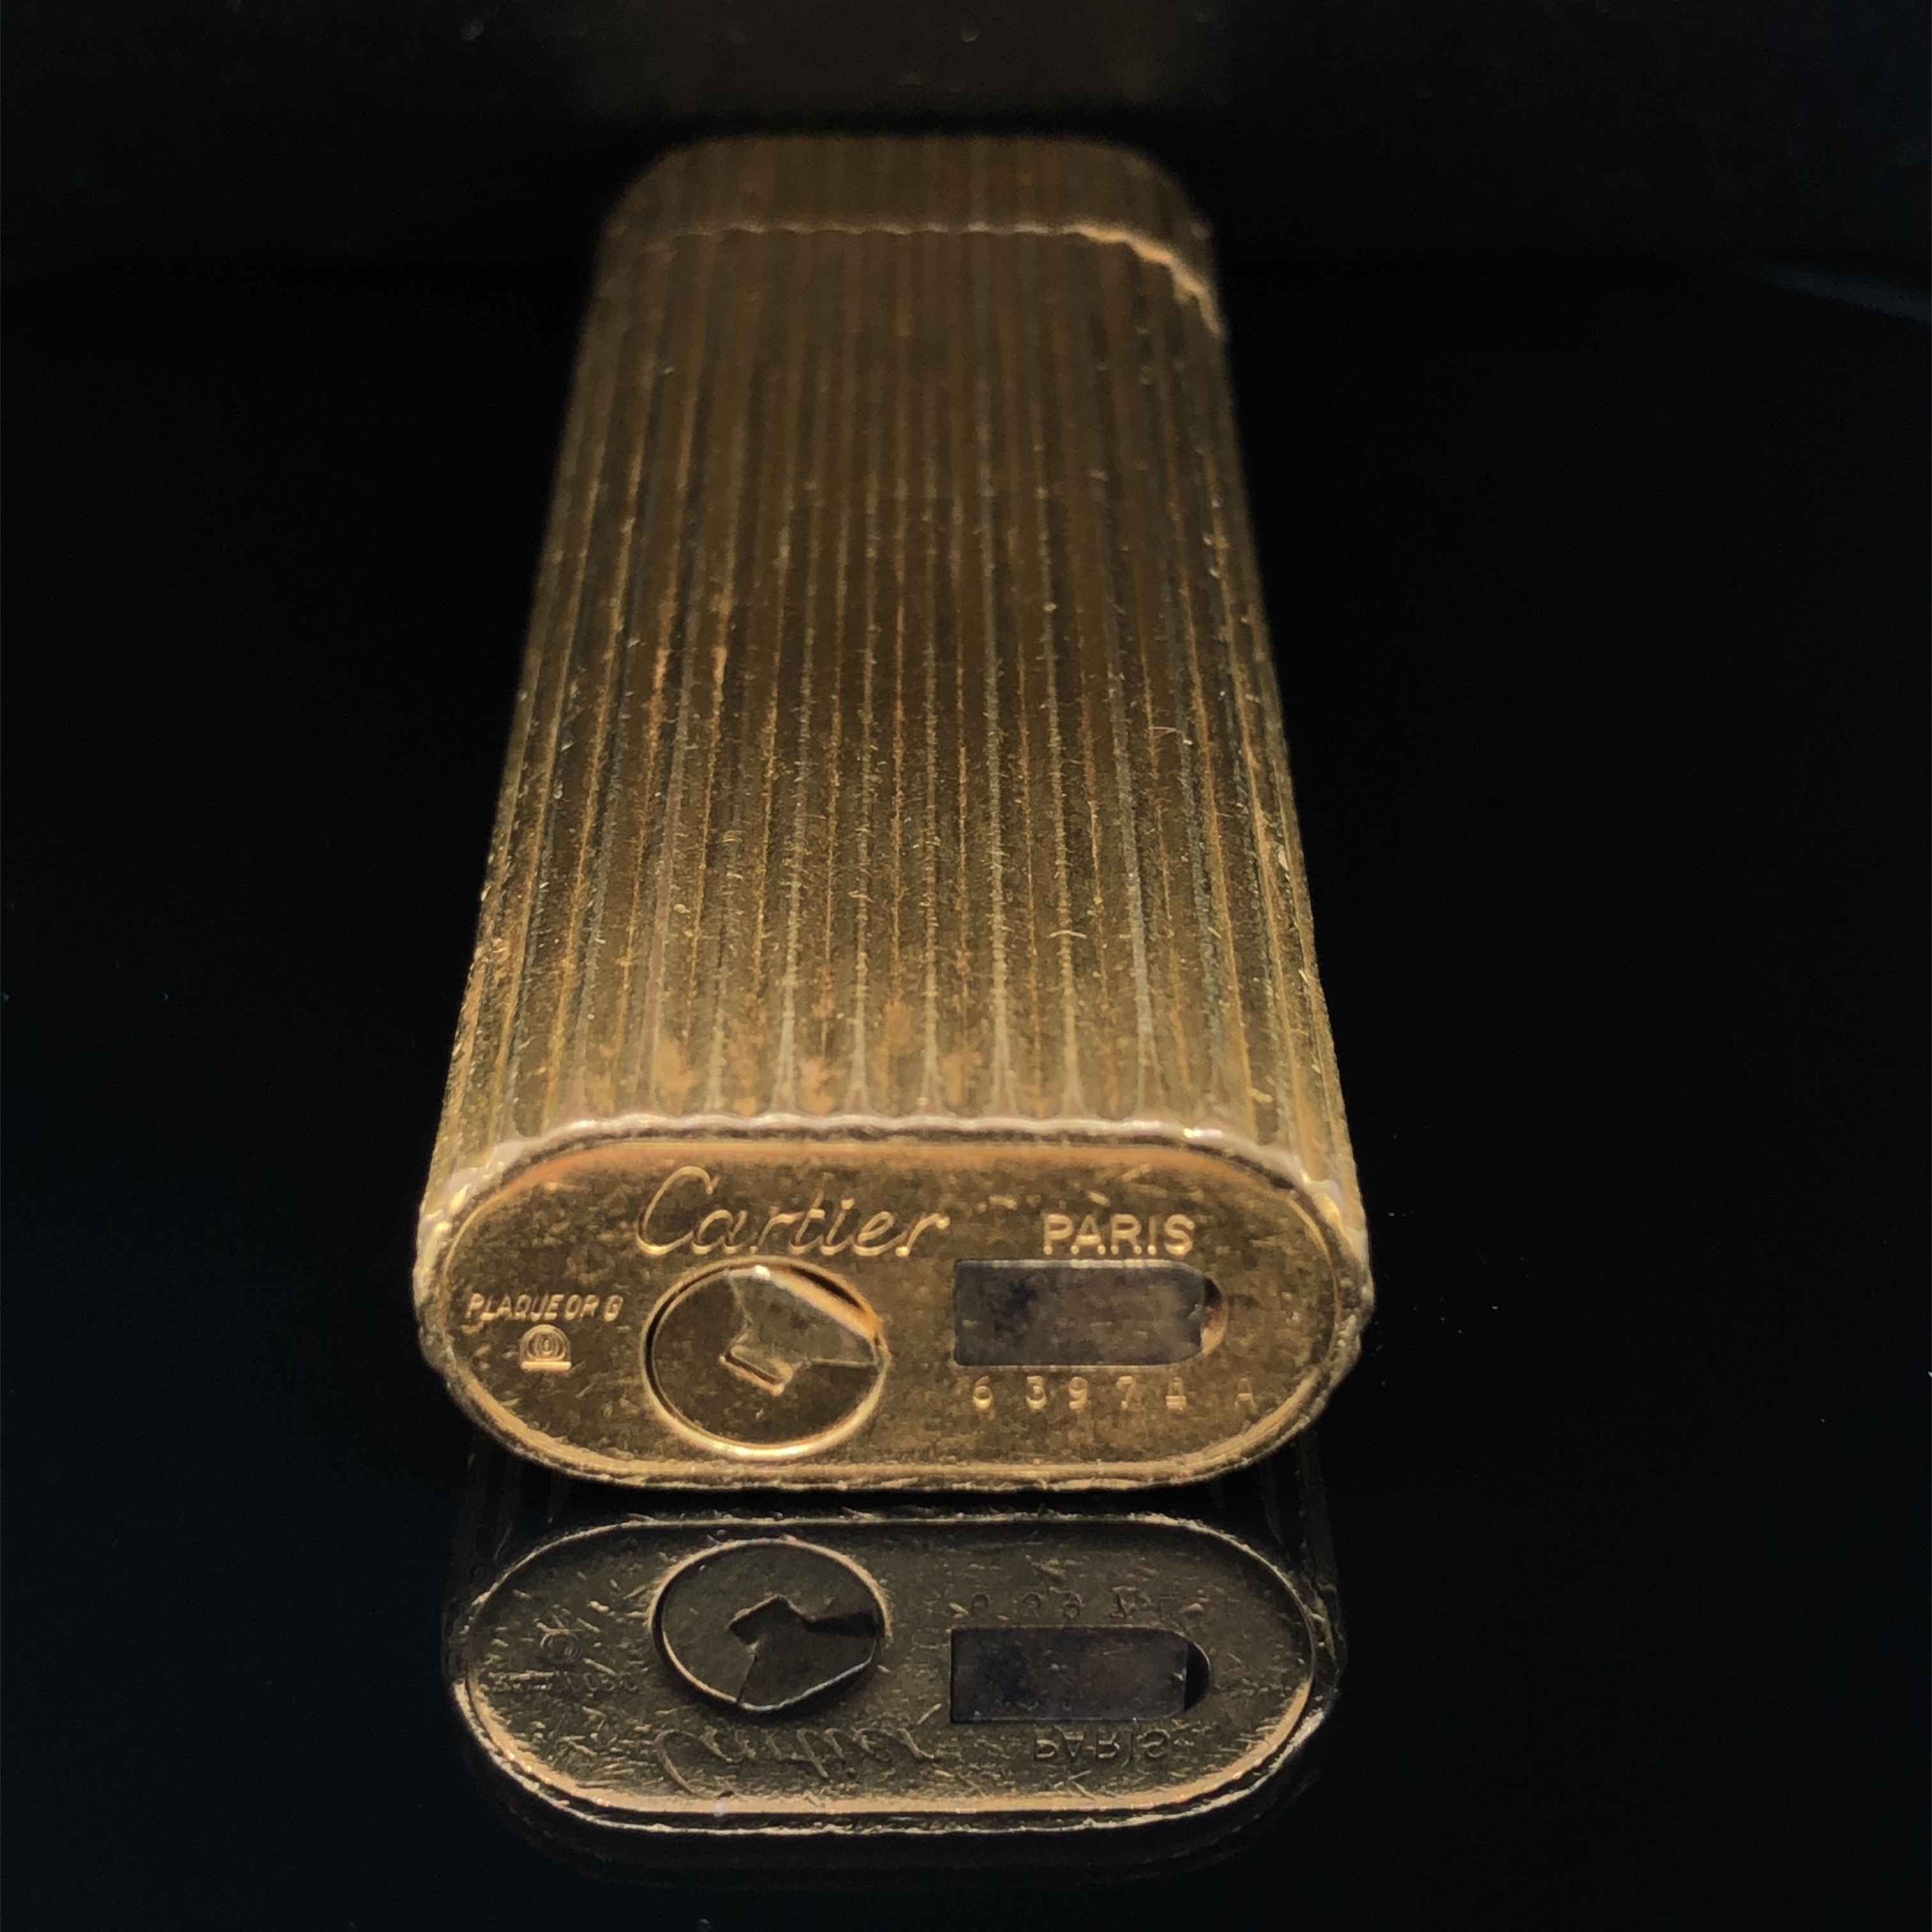 A CARTIER PARIS VINTAGE GOLD PLATED LIGHTER, 6397. HEIGHT 7cms. - Image 6 of 6